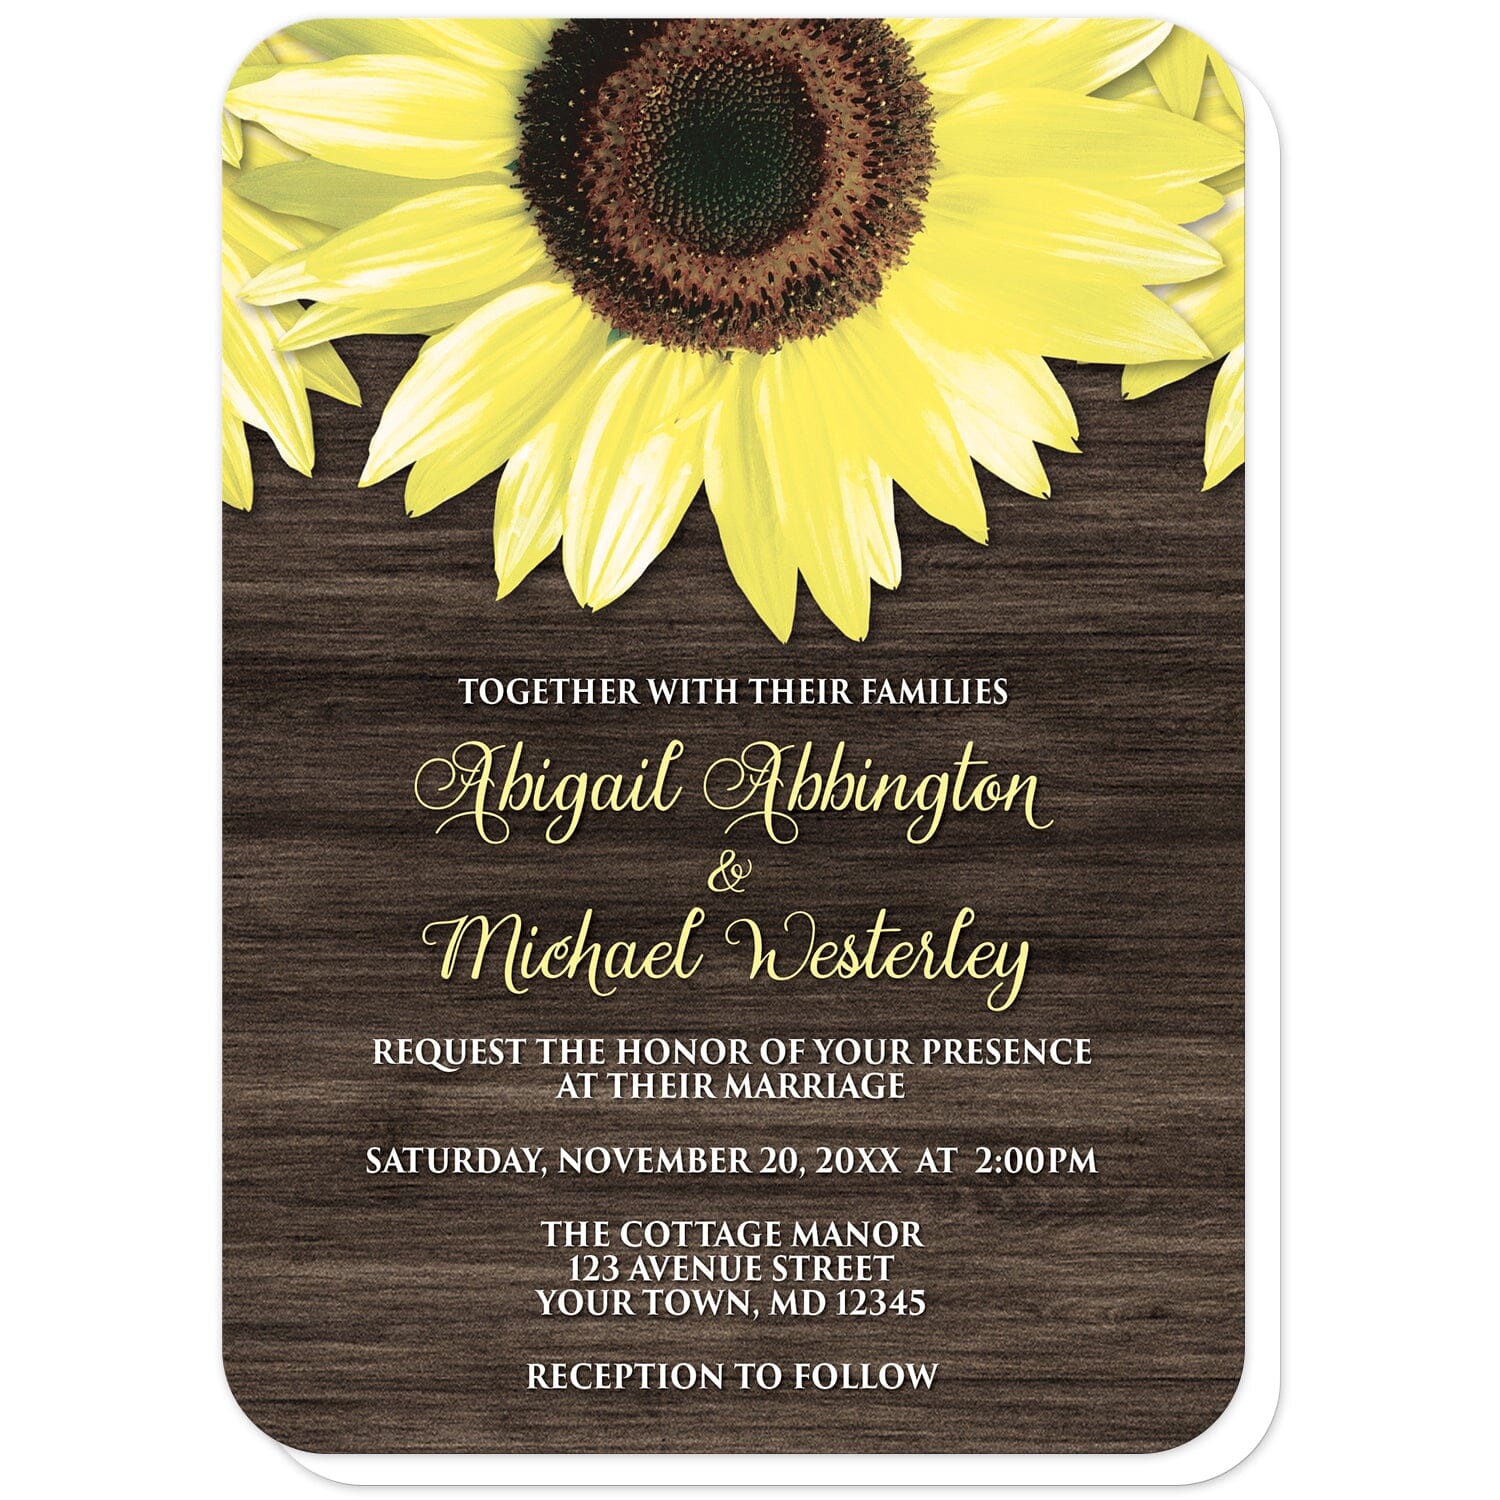 Rustic Sunflower and Wood Wedding Invitations (with rounded corners) at Artistically Invited. Southern-inspired rustic sunflower and wood wedding invitations designed with large yellow sunflowers along the top over a country brown wood design. Your personalized marriage celebration details are custom printed in yellow and white over the brown wood background below the pretty sunflowers. 